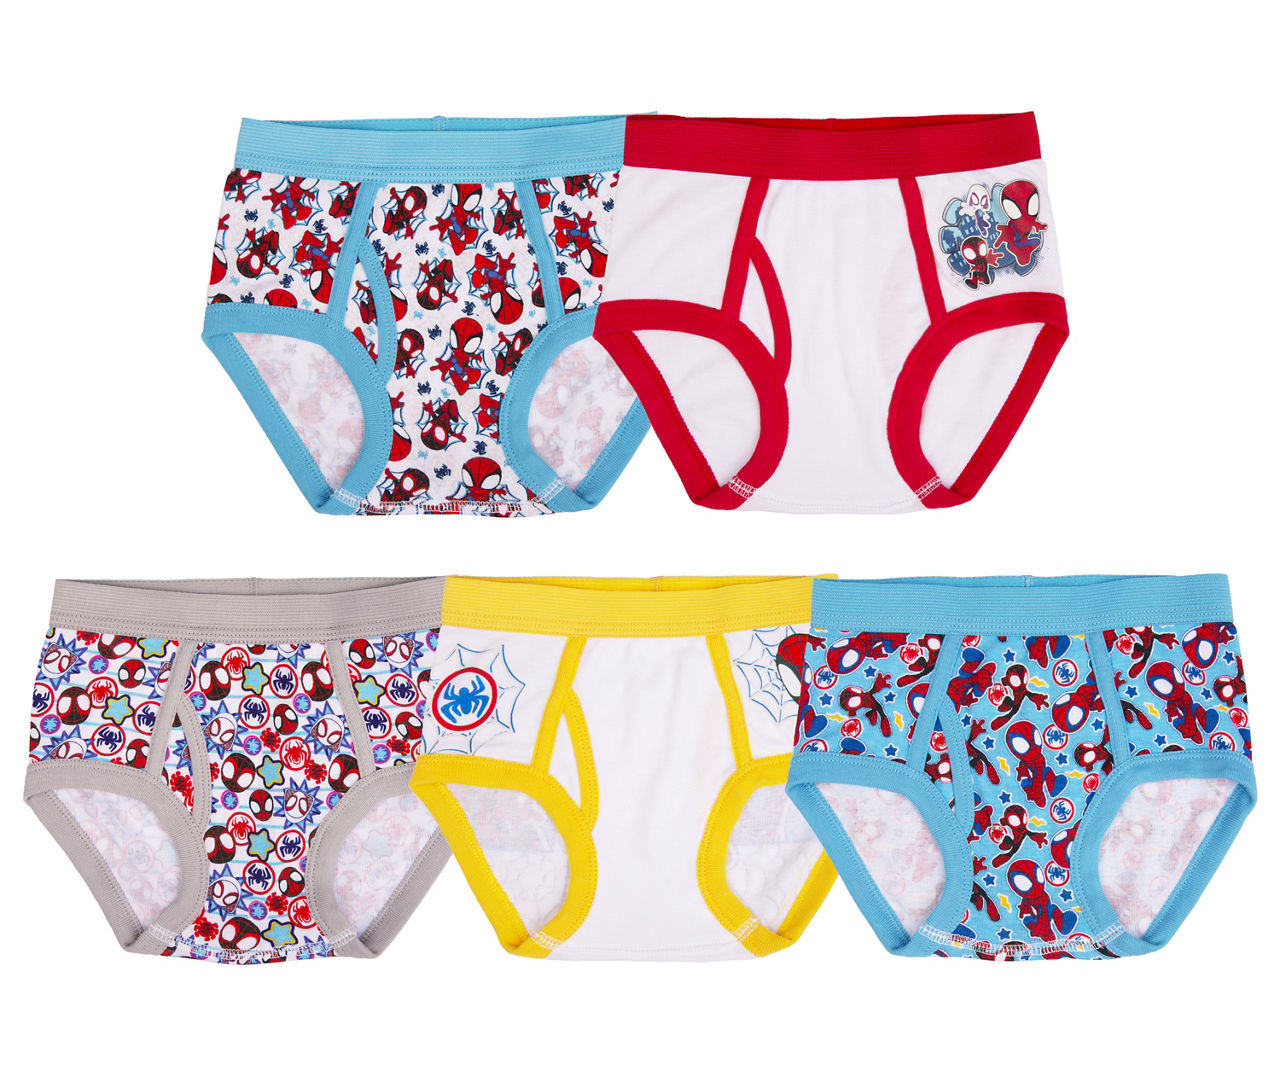 Toddler Size 2T/3T White, Red & Blue Chibi Spidey Briefs With Coloring Page, 5-Pack